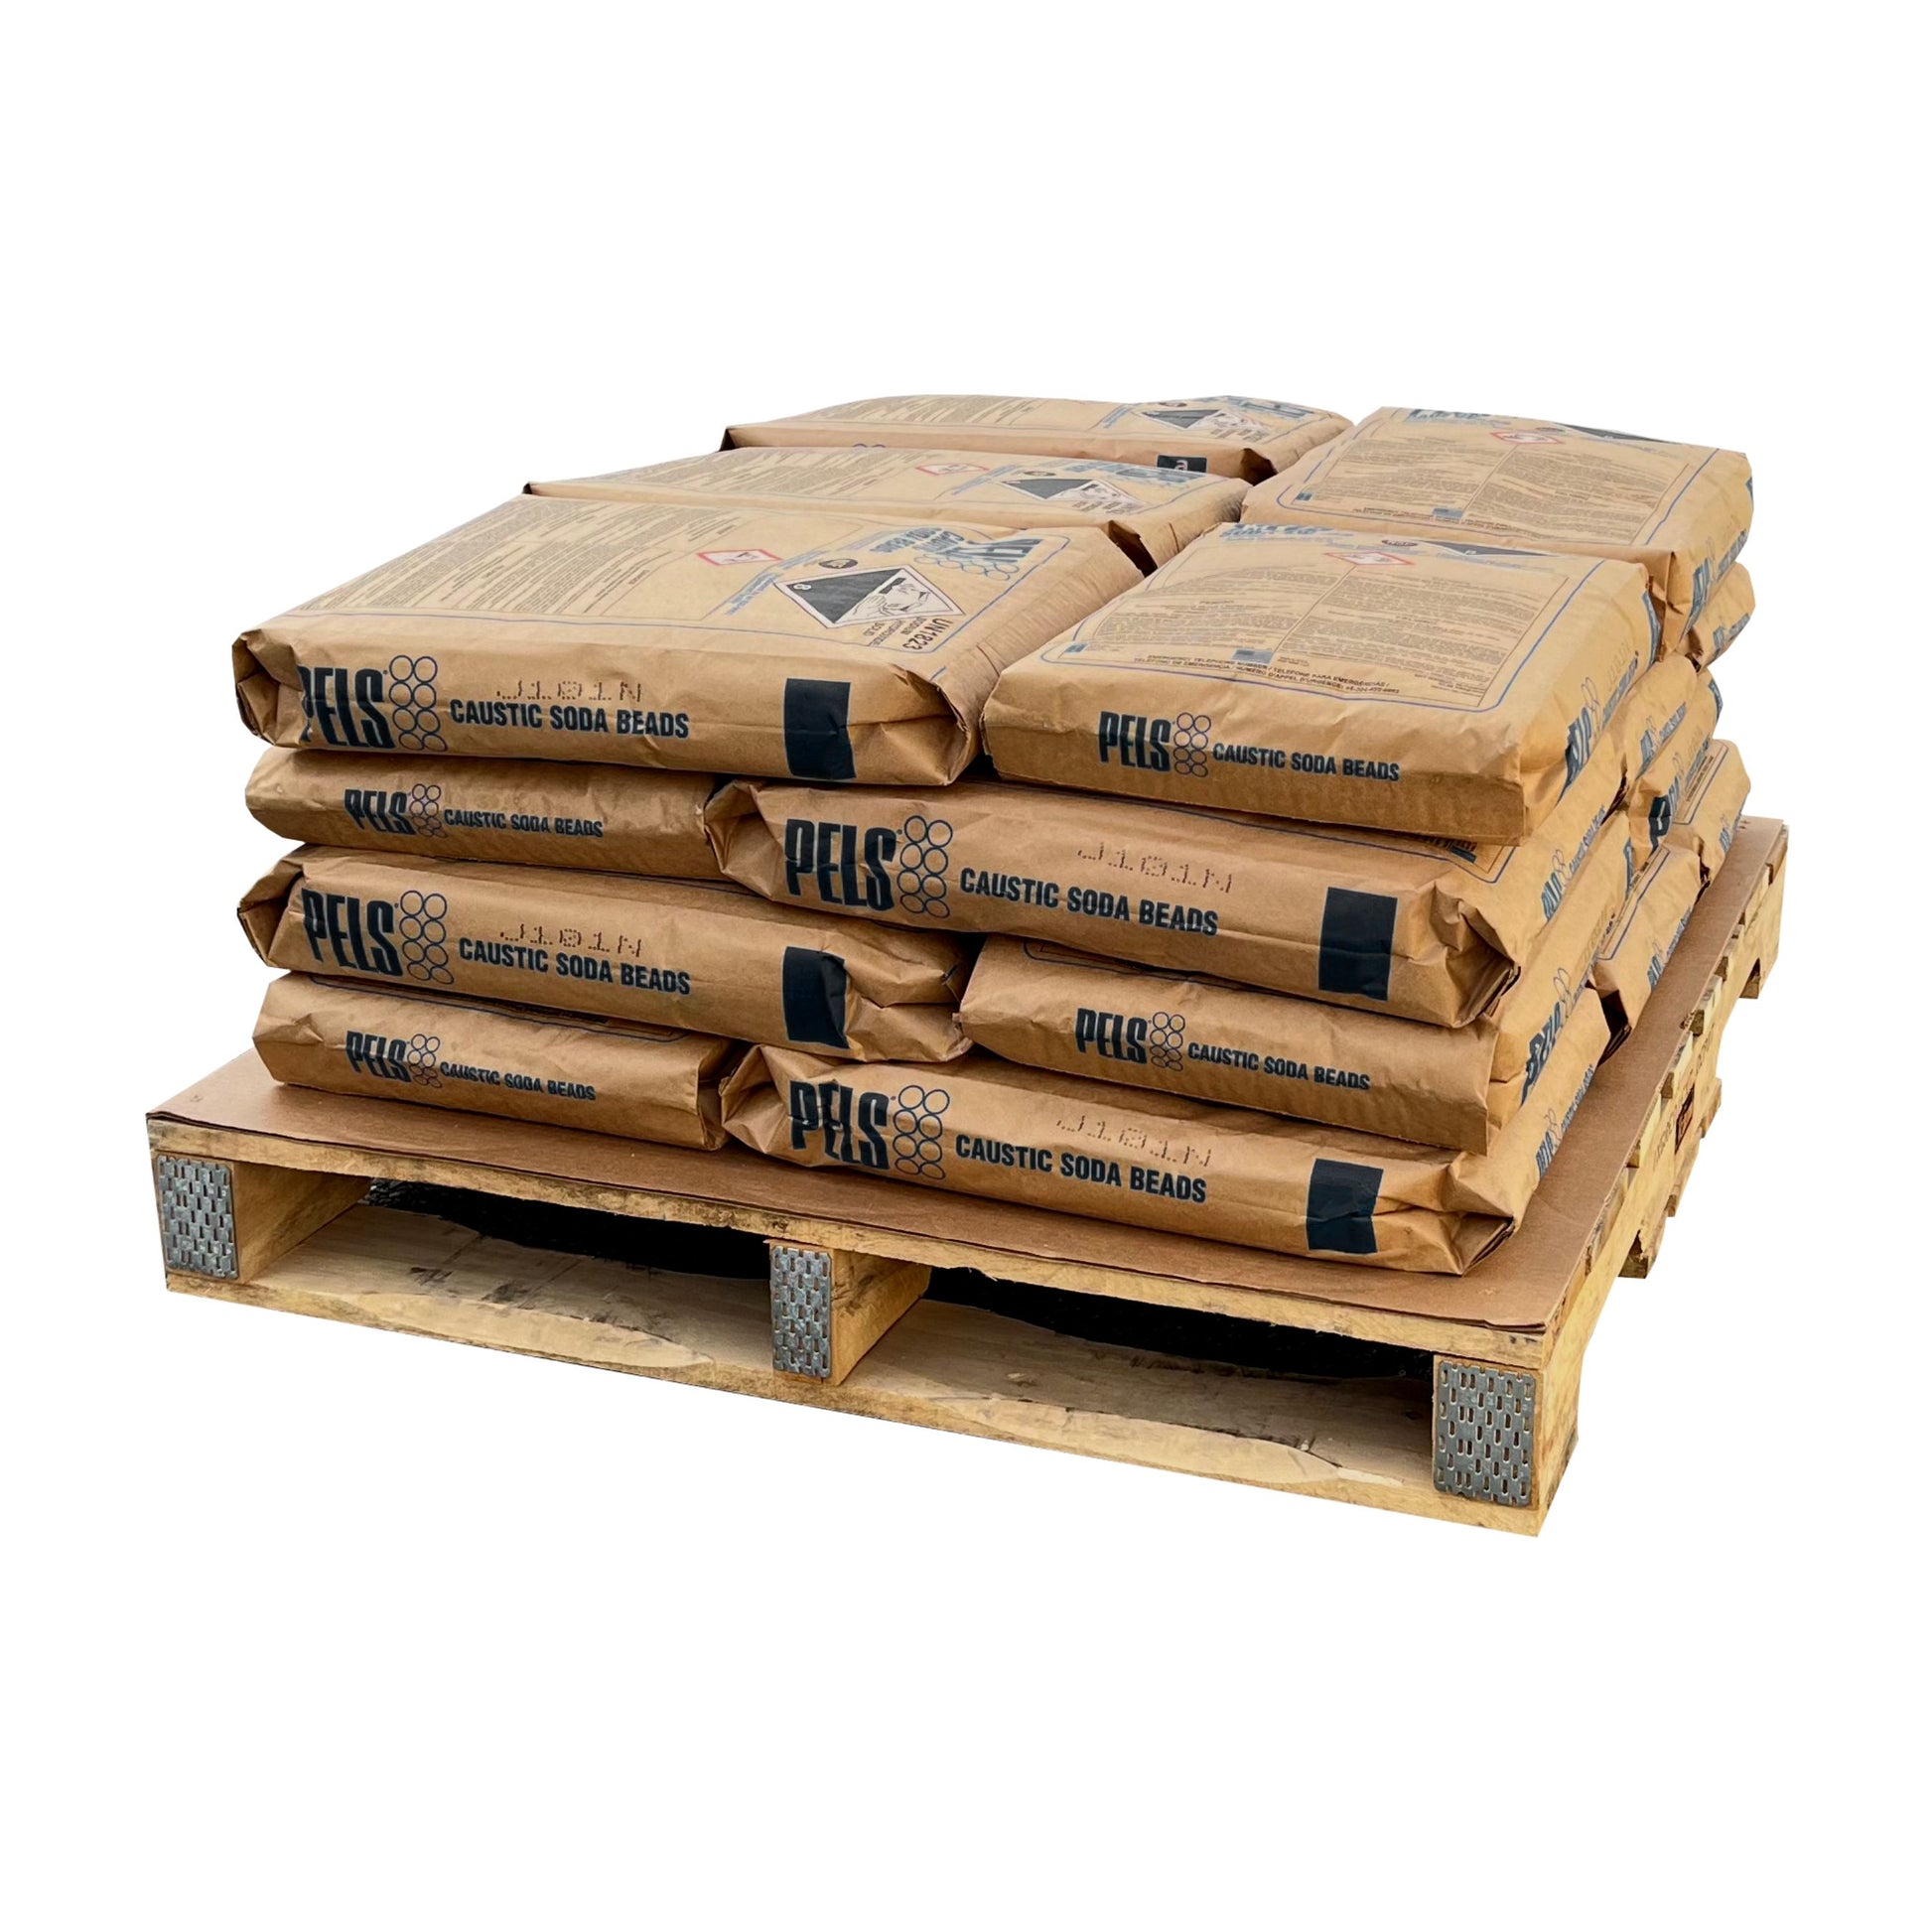 Sodium Hydroxide (NaOH or Caustic Soda) Micropearls - 22.68 kgs Bag(s) on a Pallet - IngredientDepot.com